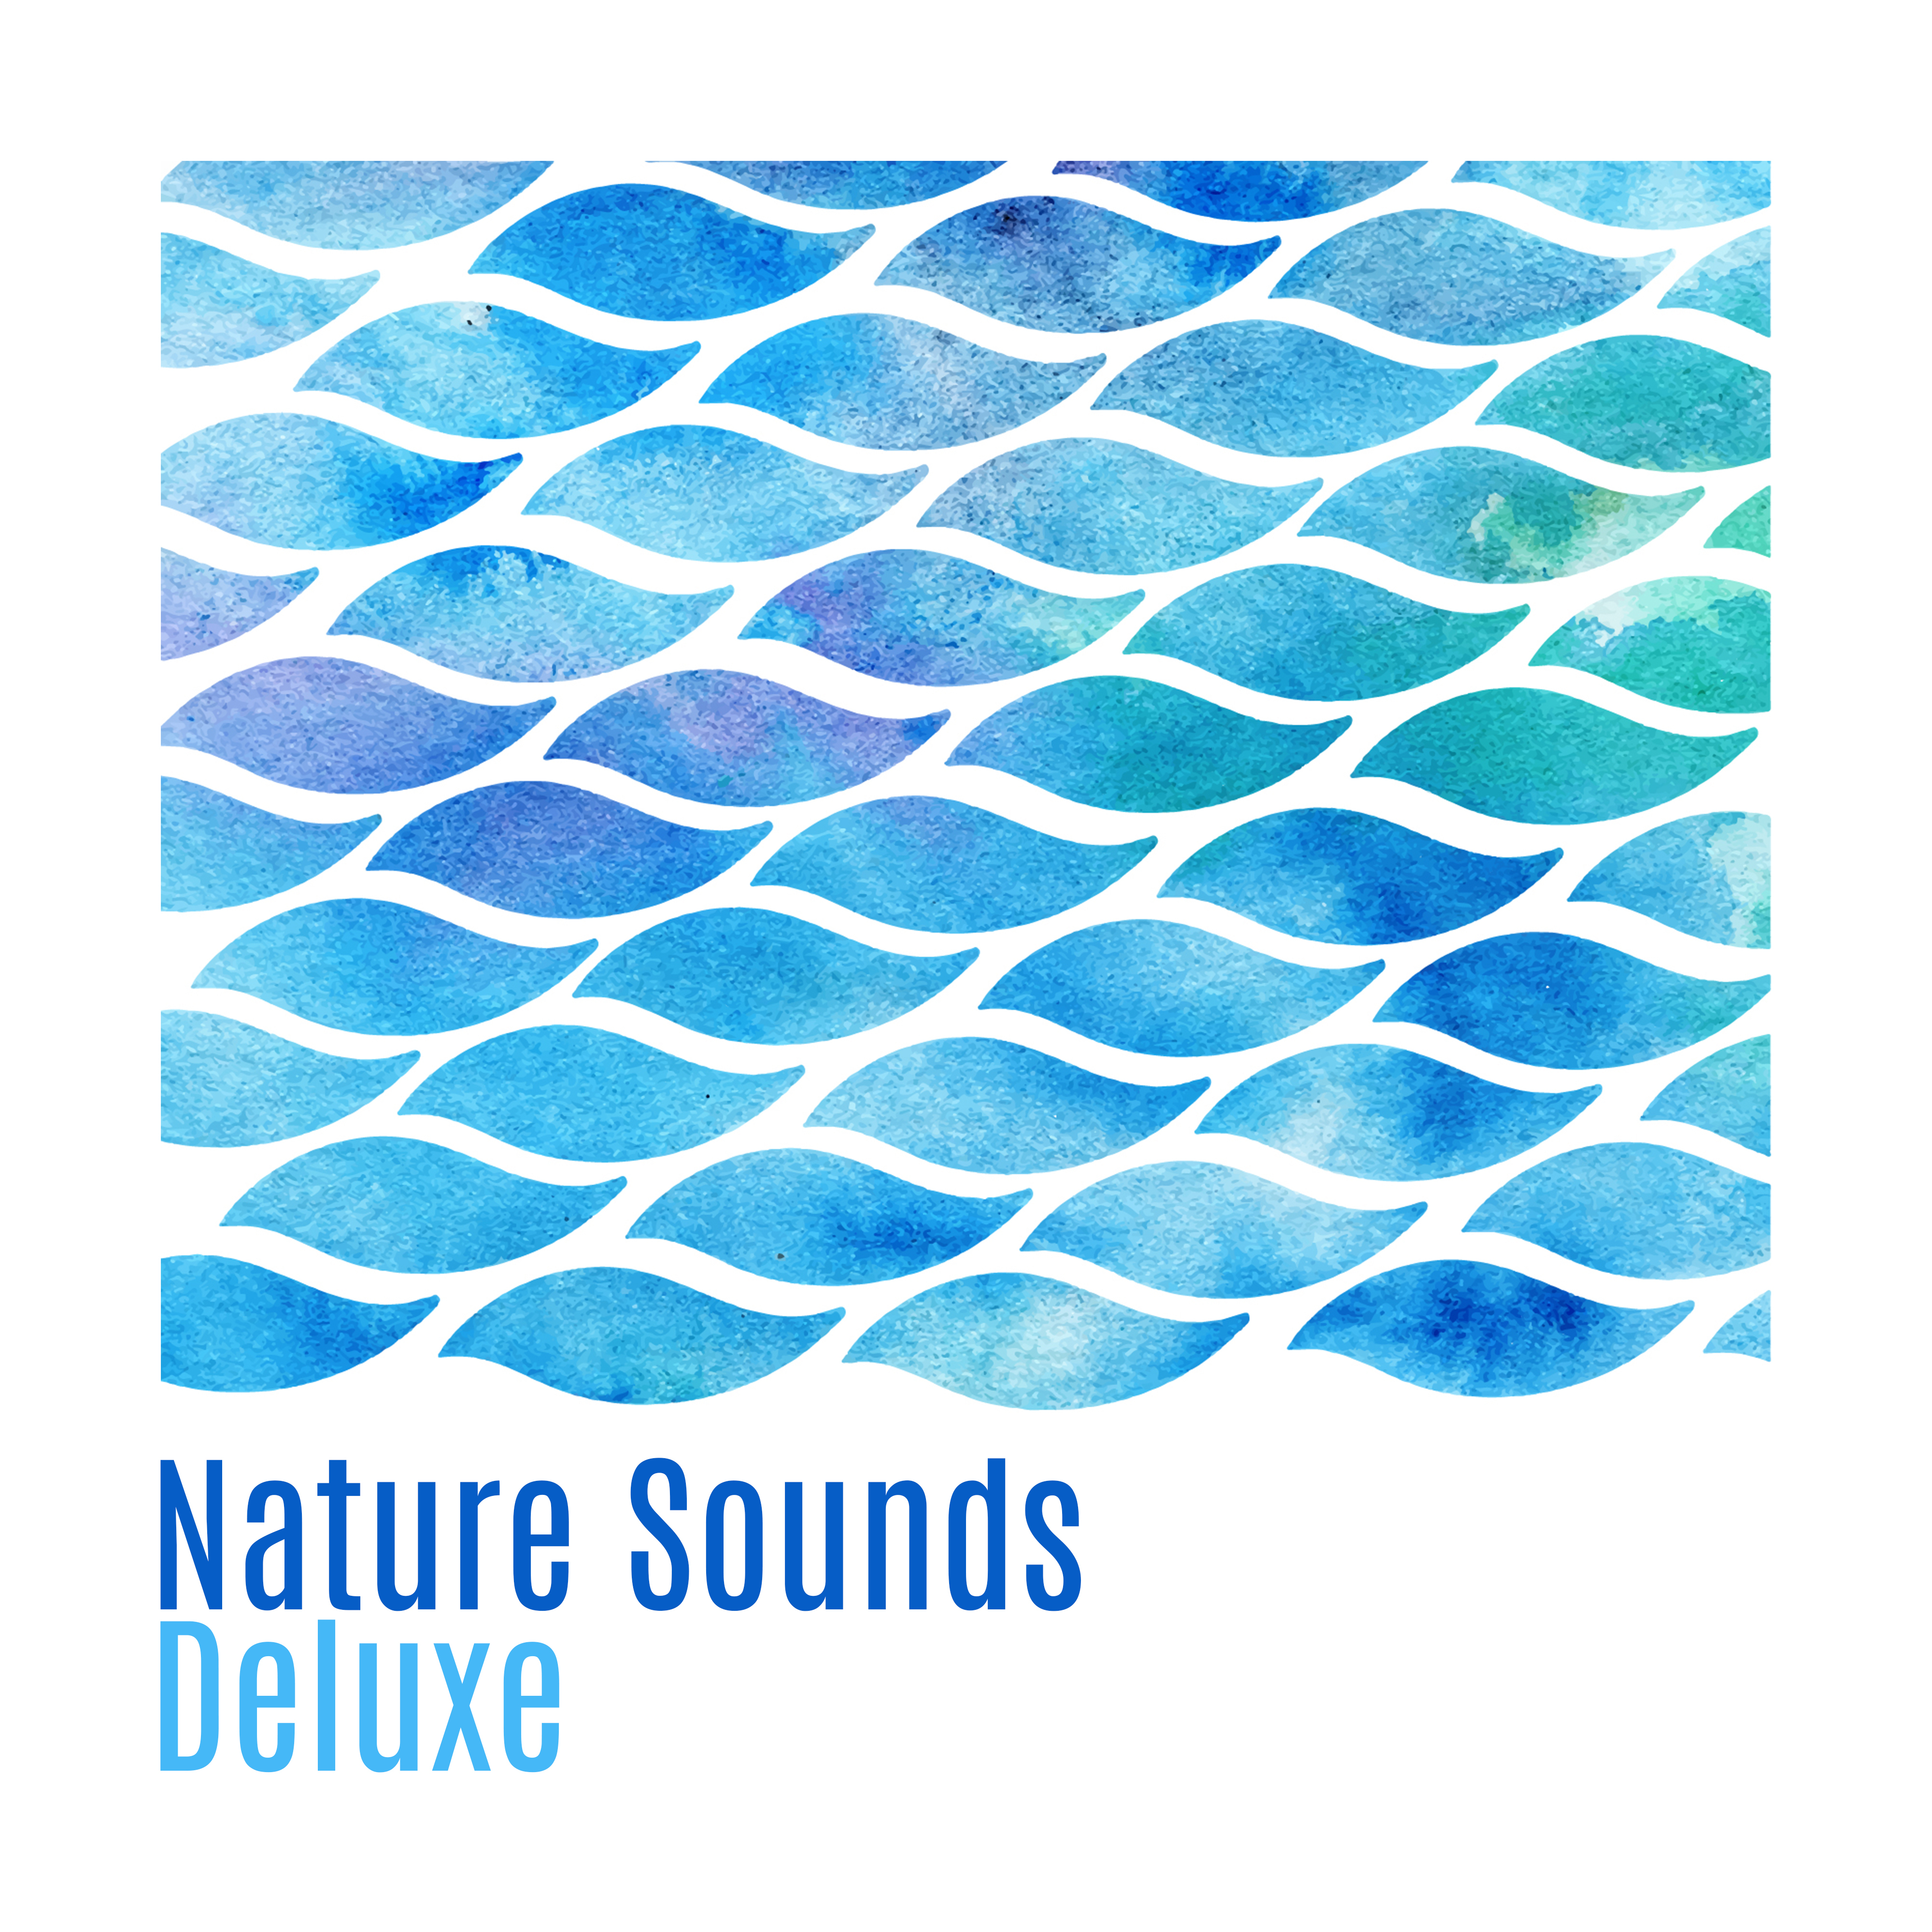 Nature Sounds Deluxe